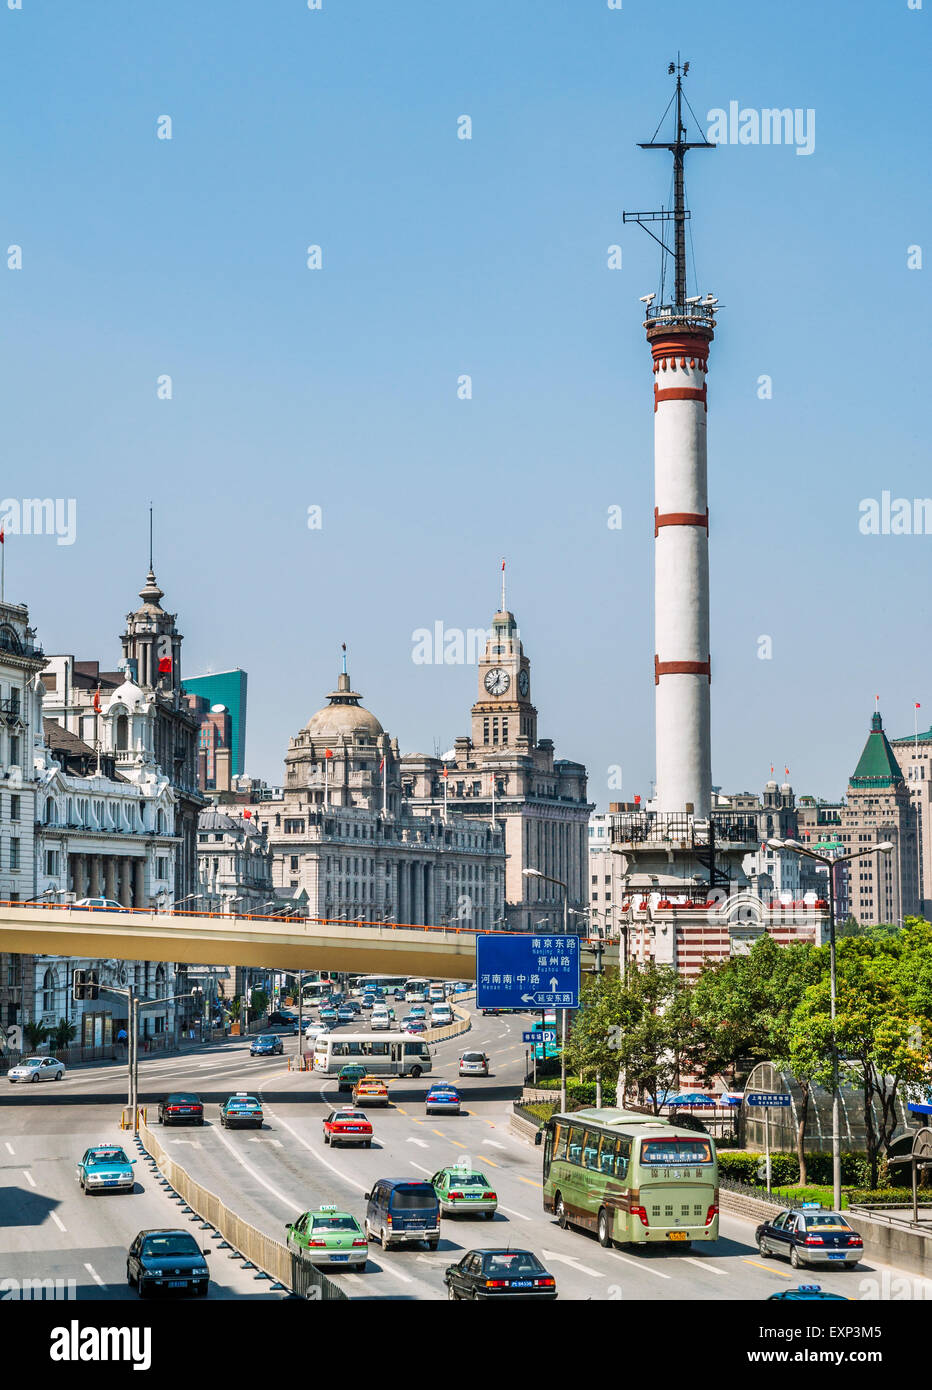 China, Shanghai, view of the Gutzlaff Signal Tower and busy Zhongshan East 1st Road Stock Photo